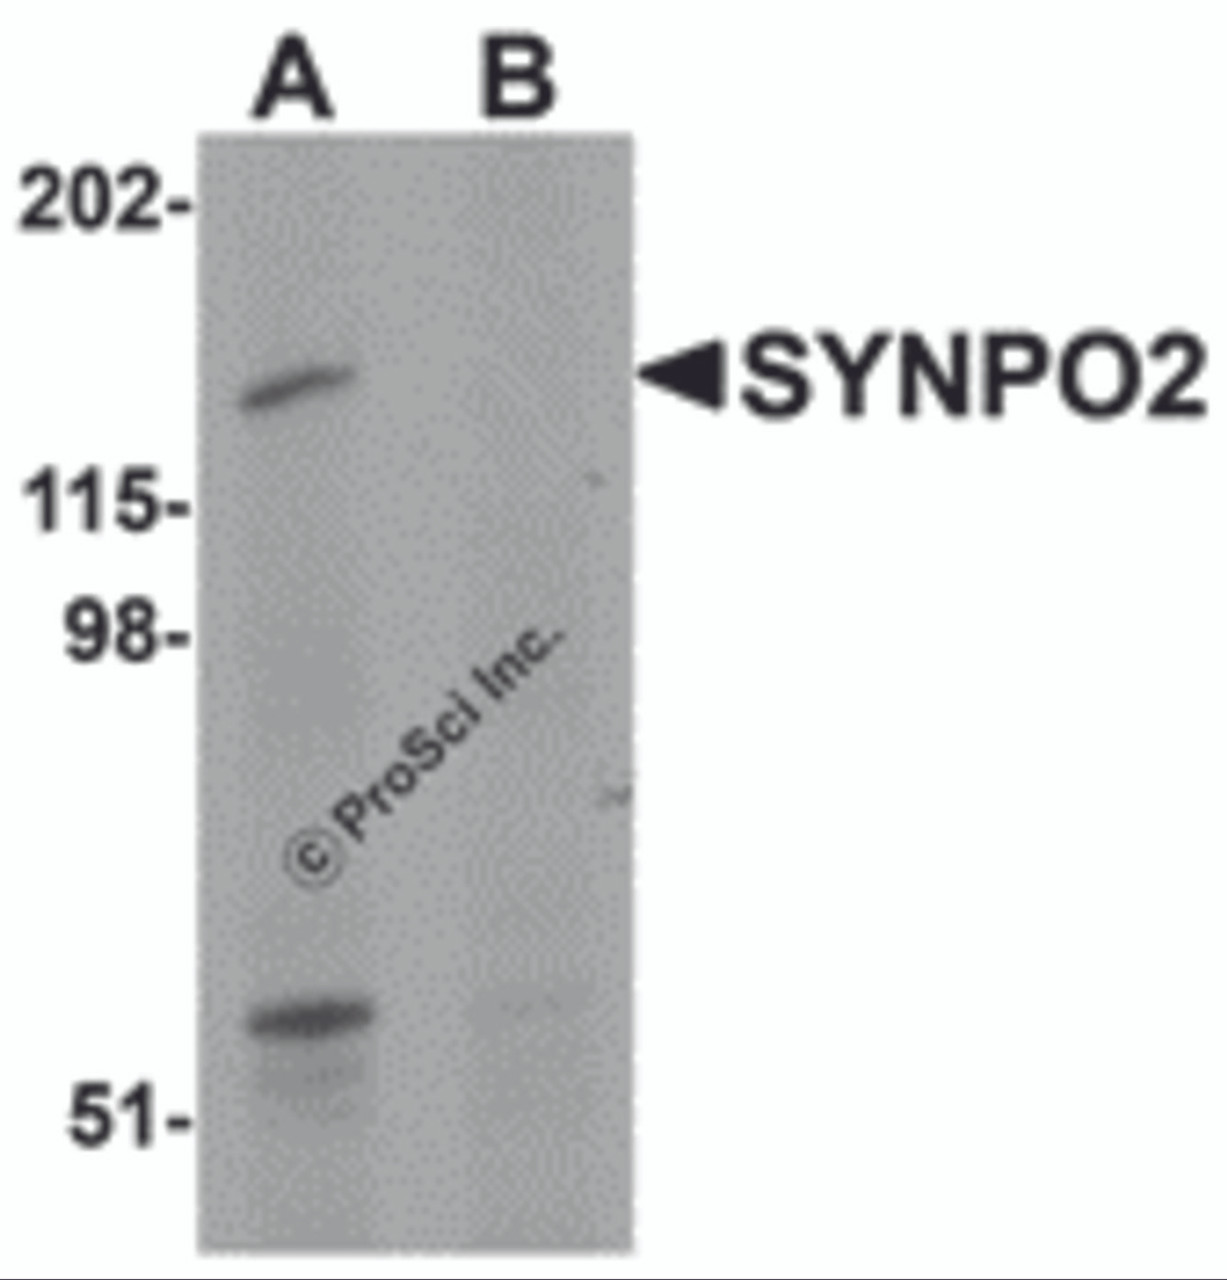 Western blot analysis of SYNPO2 in human skeletal muscle tissue lysate with SYNPO2 antibody at 1 &#956;g/mL in (A) the absence and (B) the presence of blocking peptide.